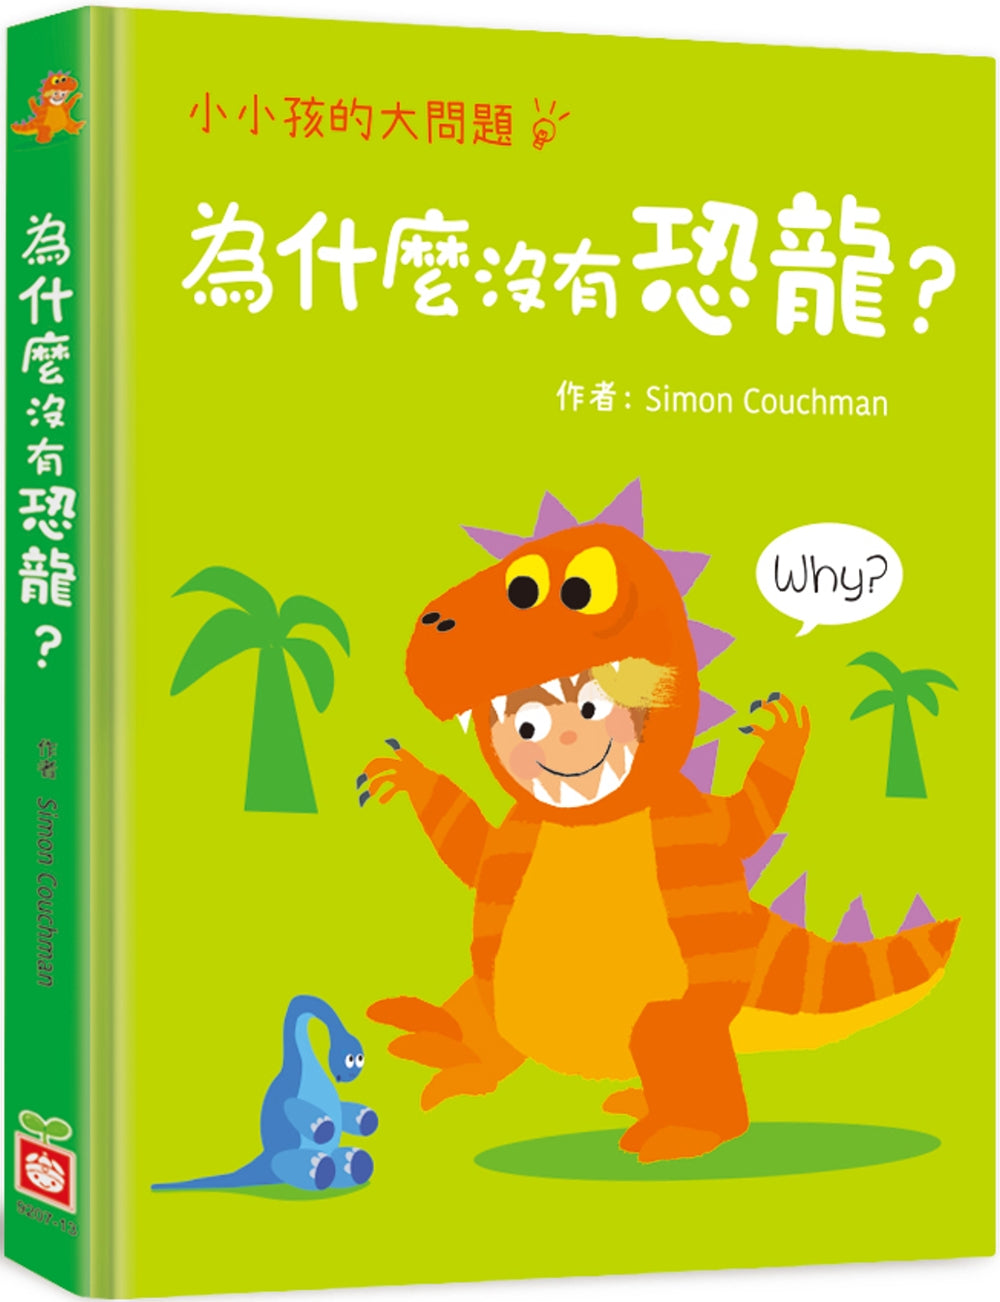 Why Are There No Dinosaurs Today? • 小小孩的大問題：為什麼沒有恐龍？（厚紙翻翻書）